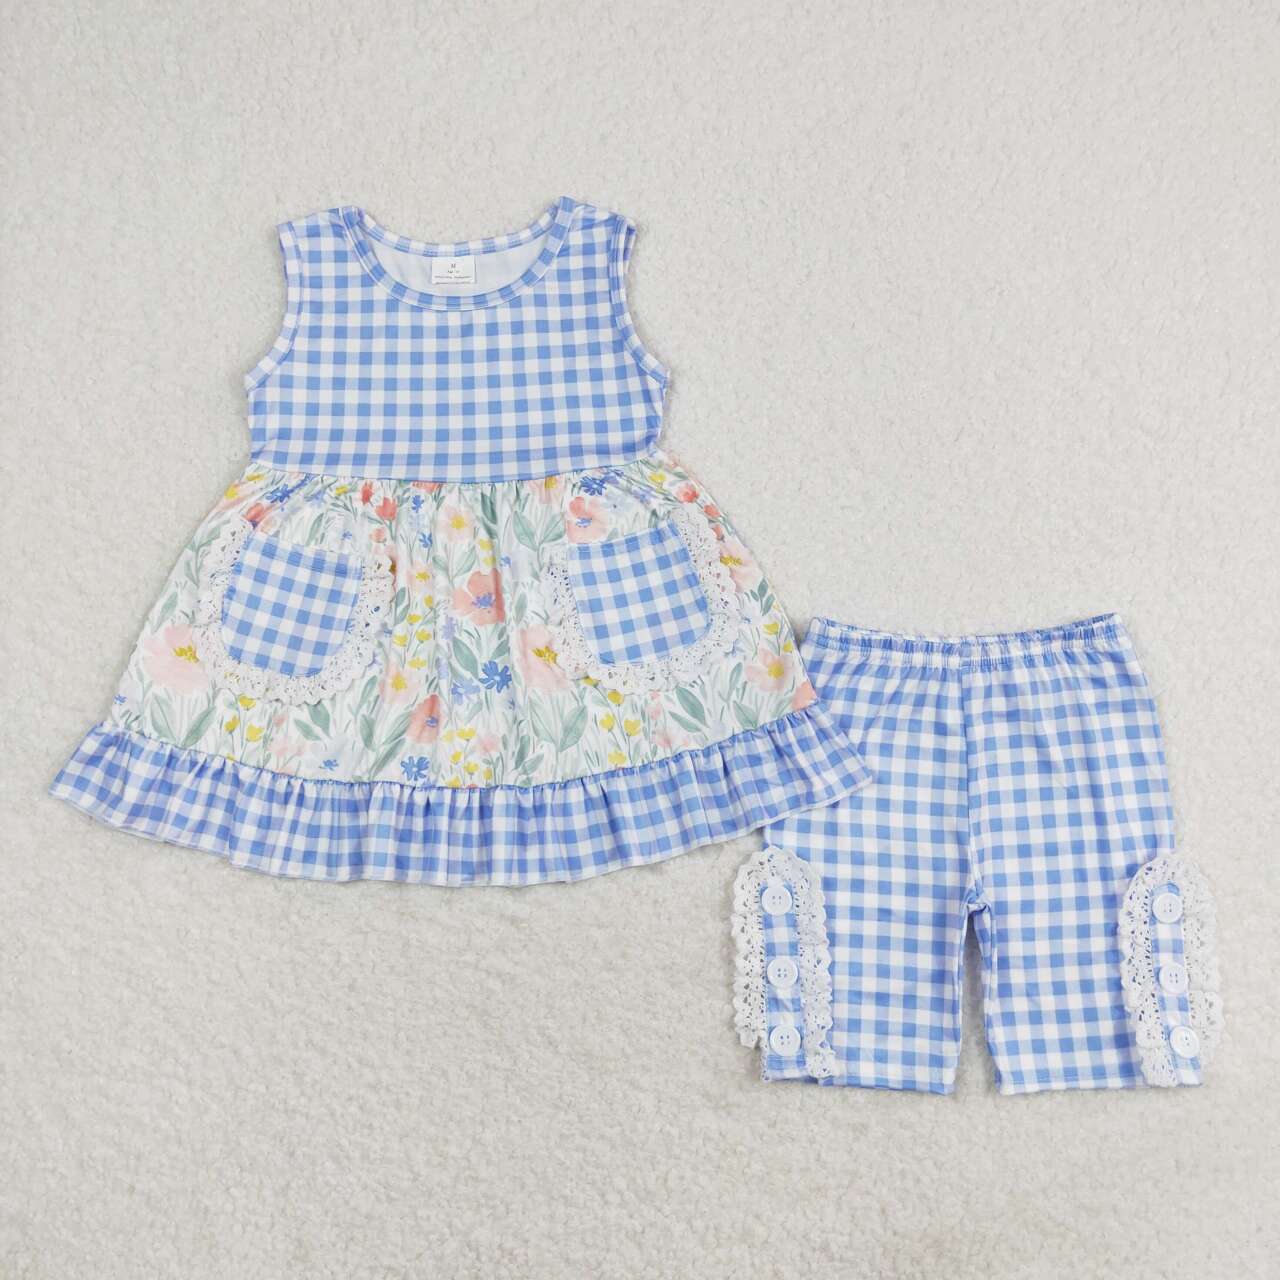 GSSO0908 Floral floral blue and white plaid pocket lace sleeveless shorts suit